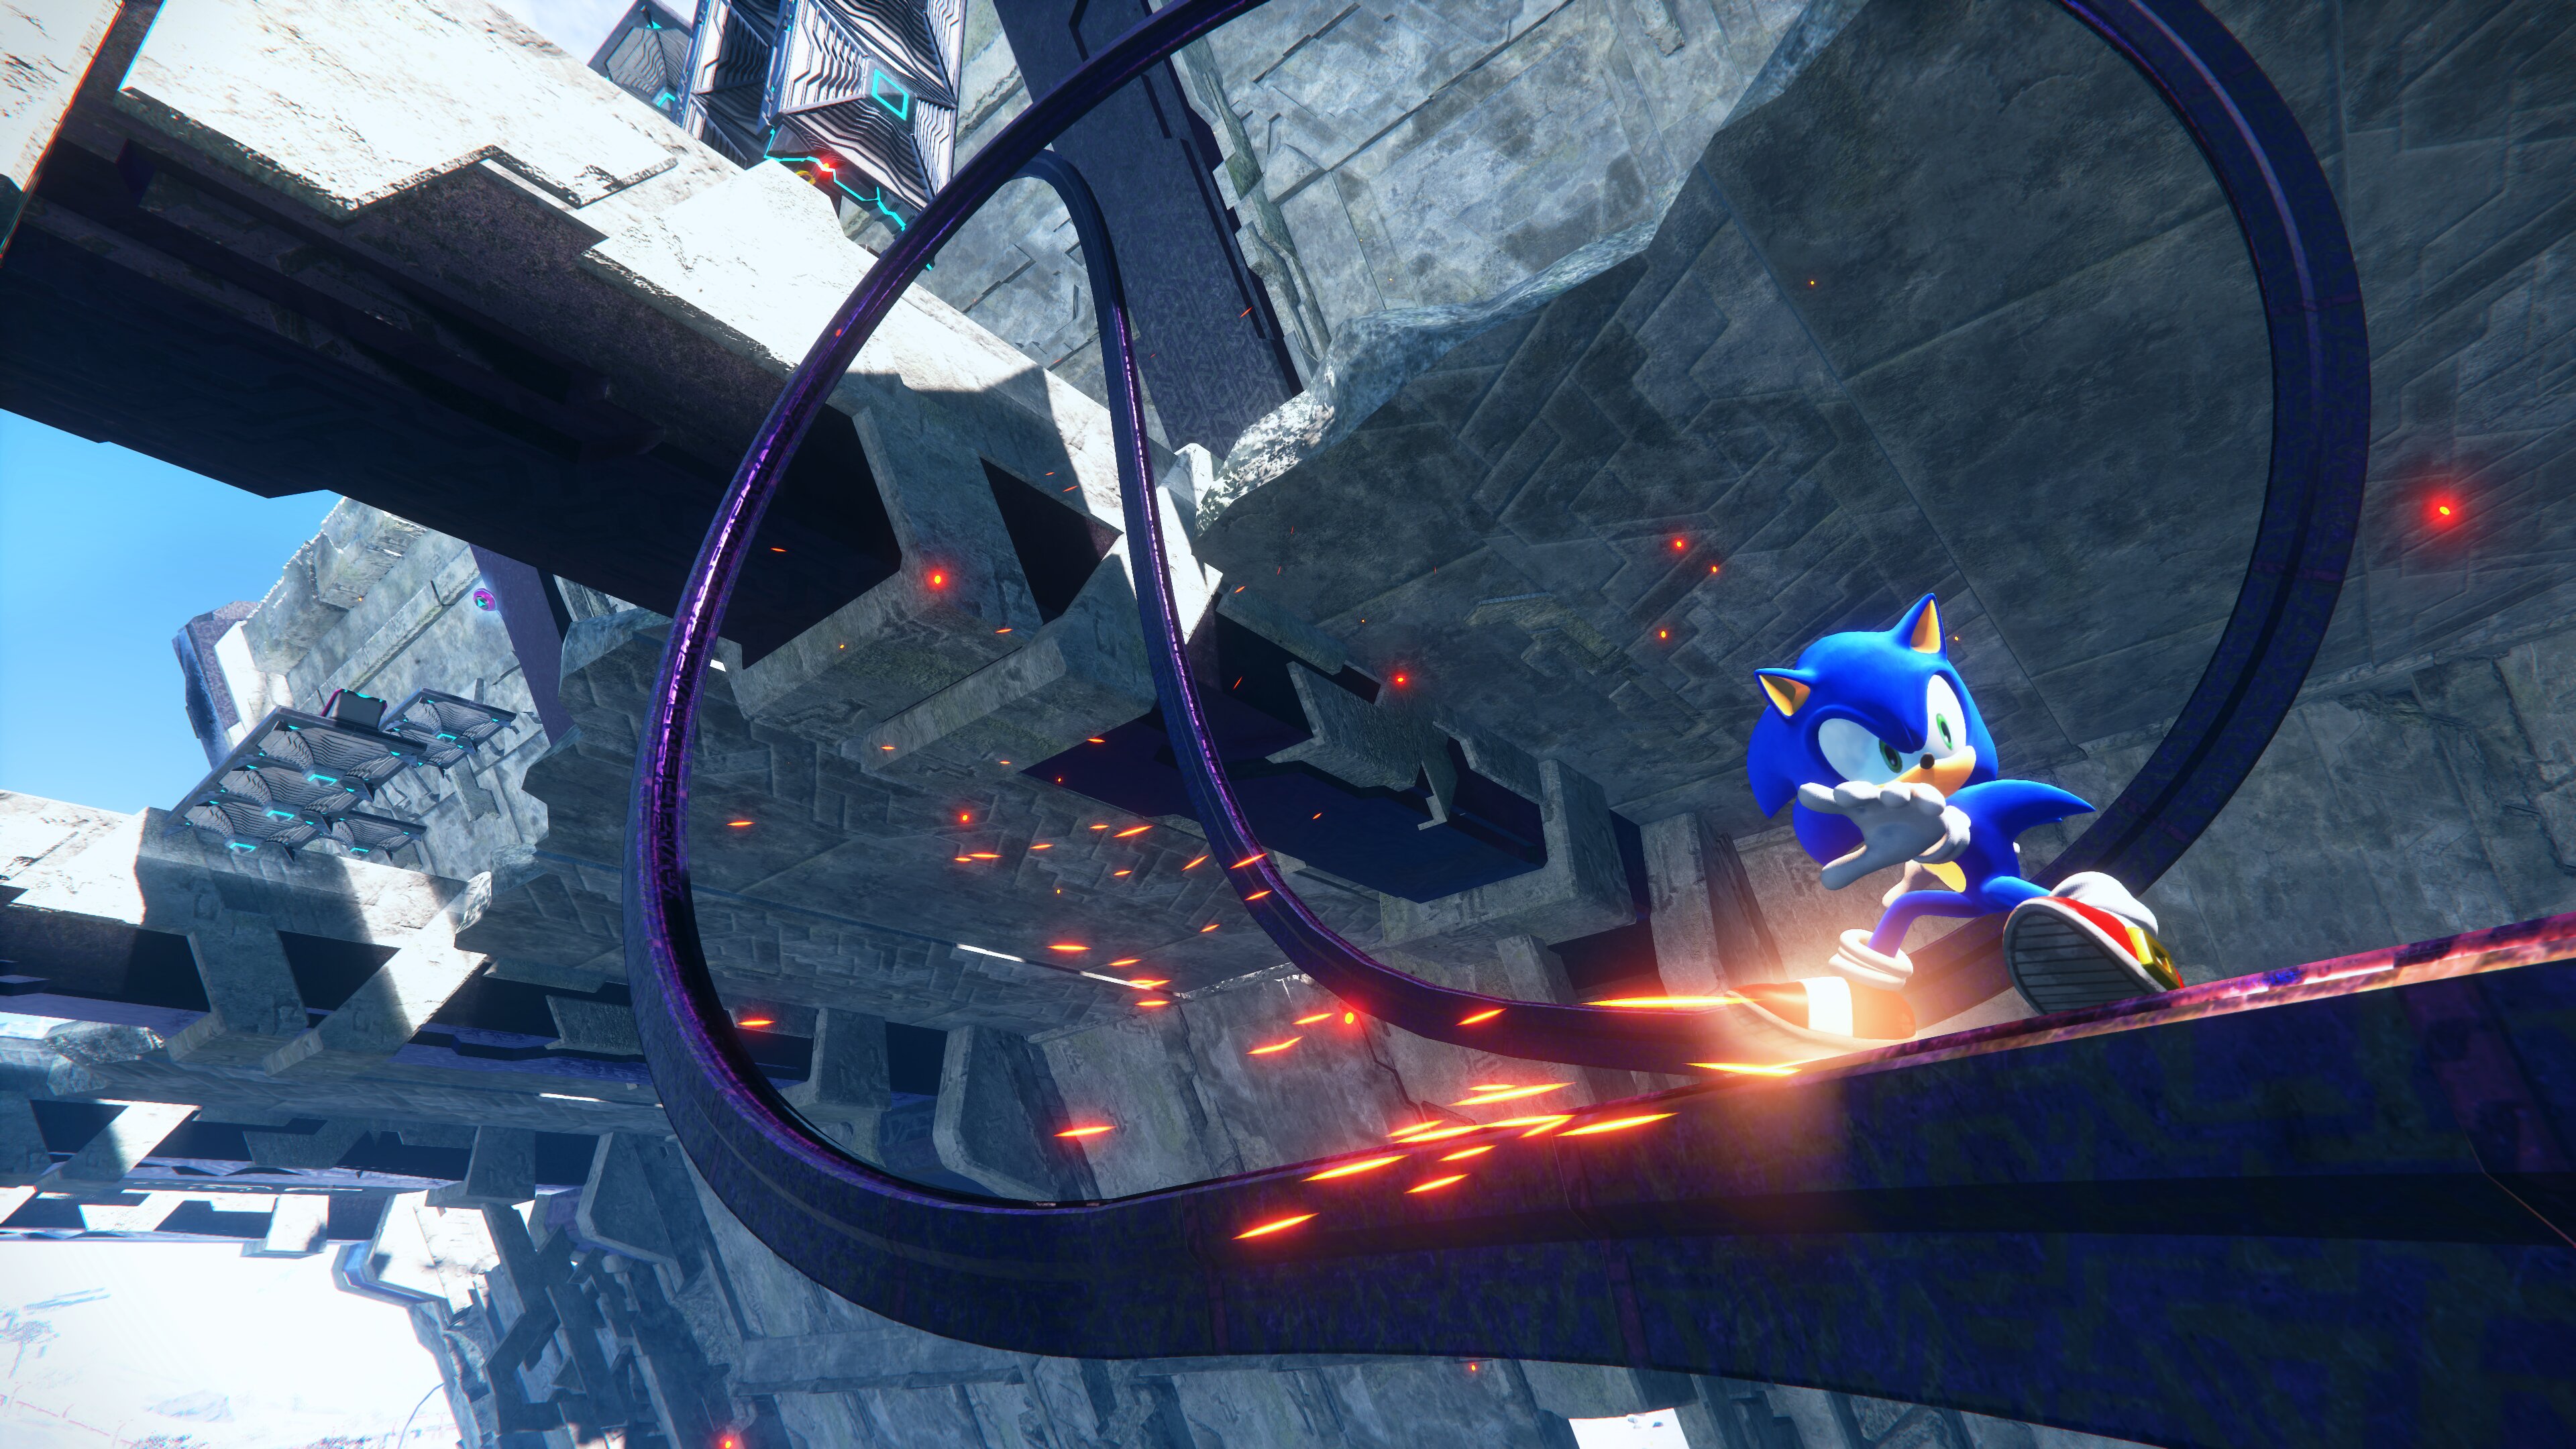 Sonic Frontiers Review (PS5)